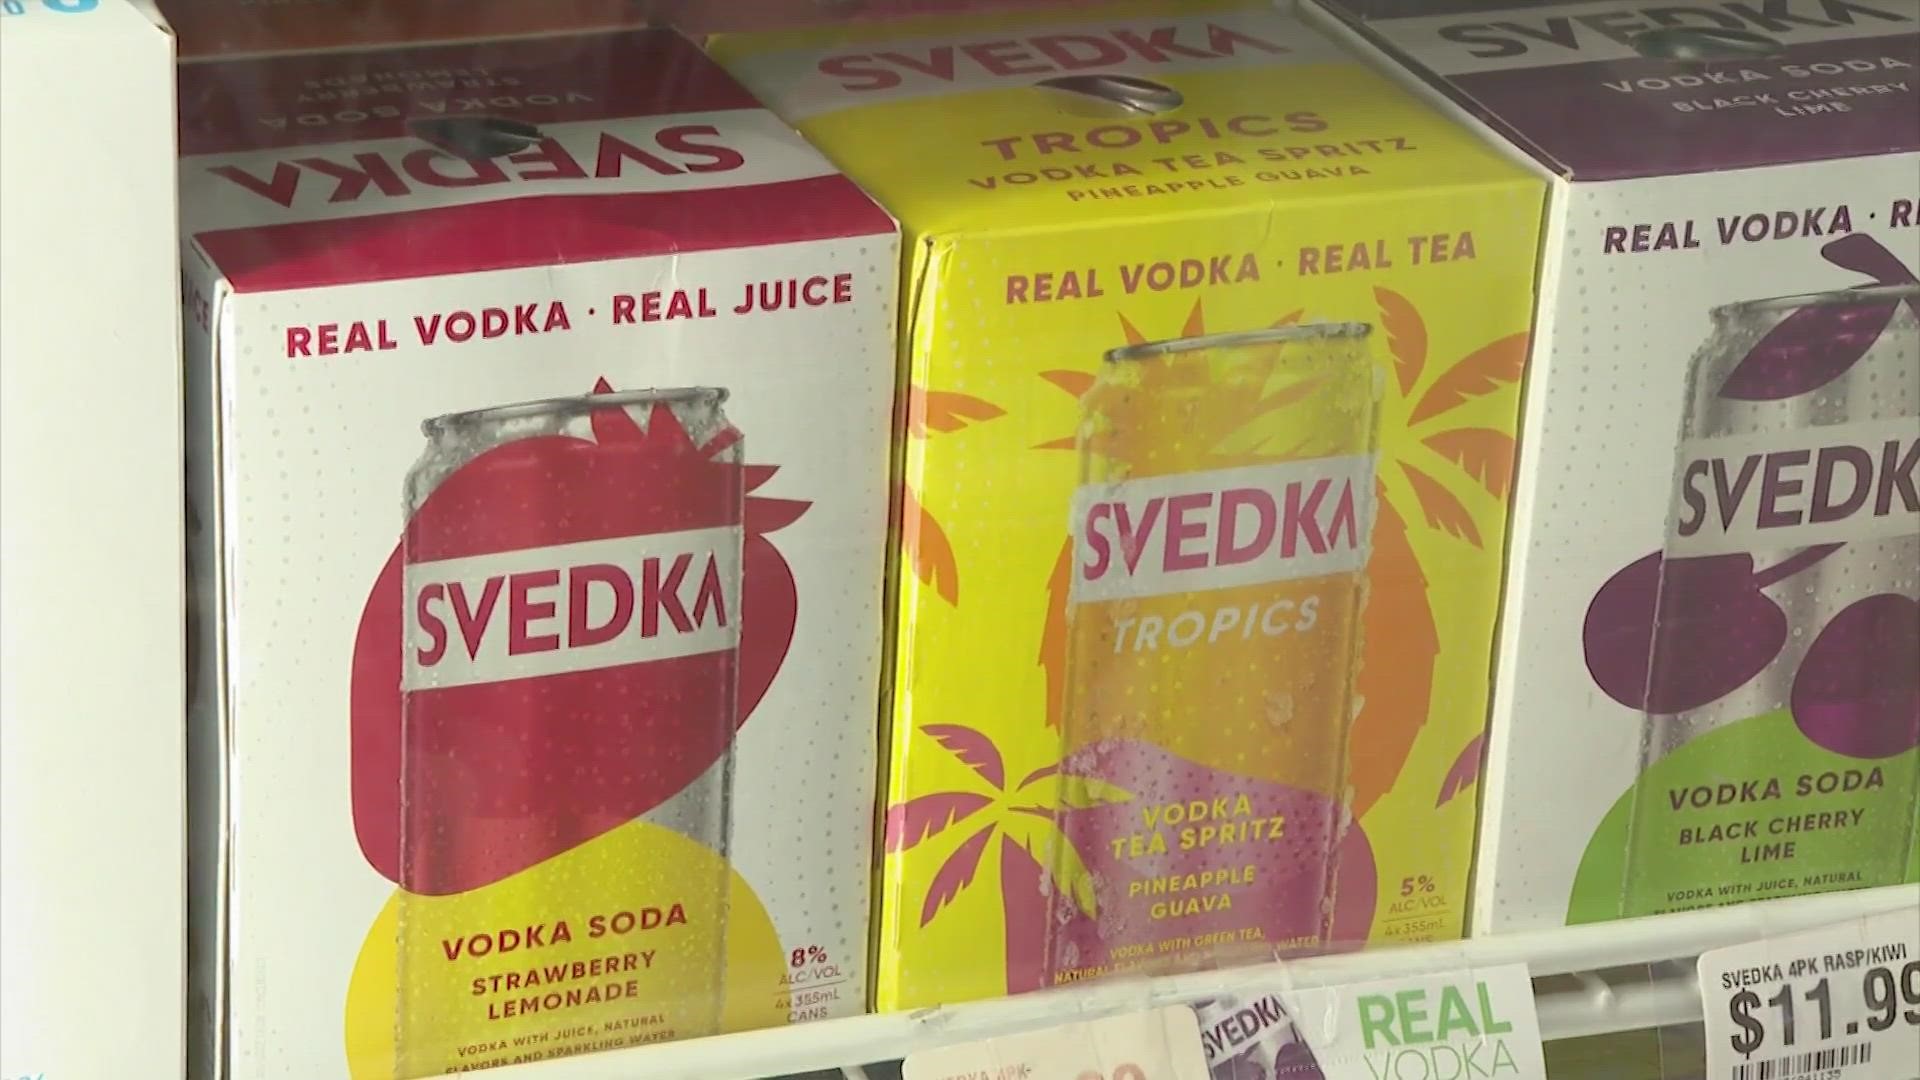 New pieces of legislation have been introduced that would allow ready-to-drink cocktails to be sold at grocery and convenience stores in Texas.